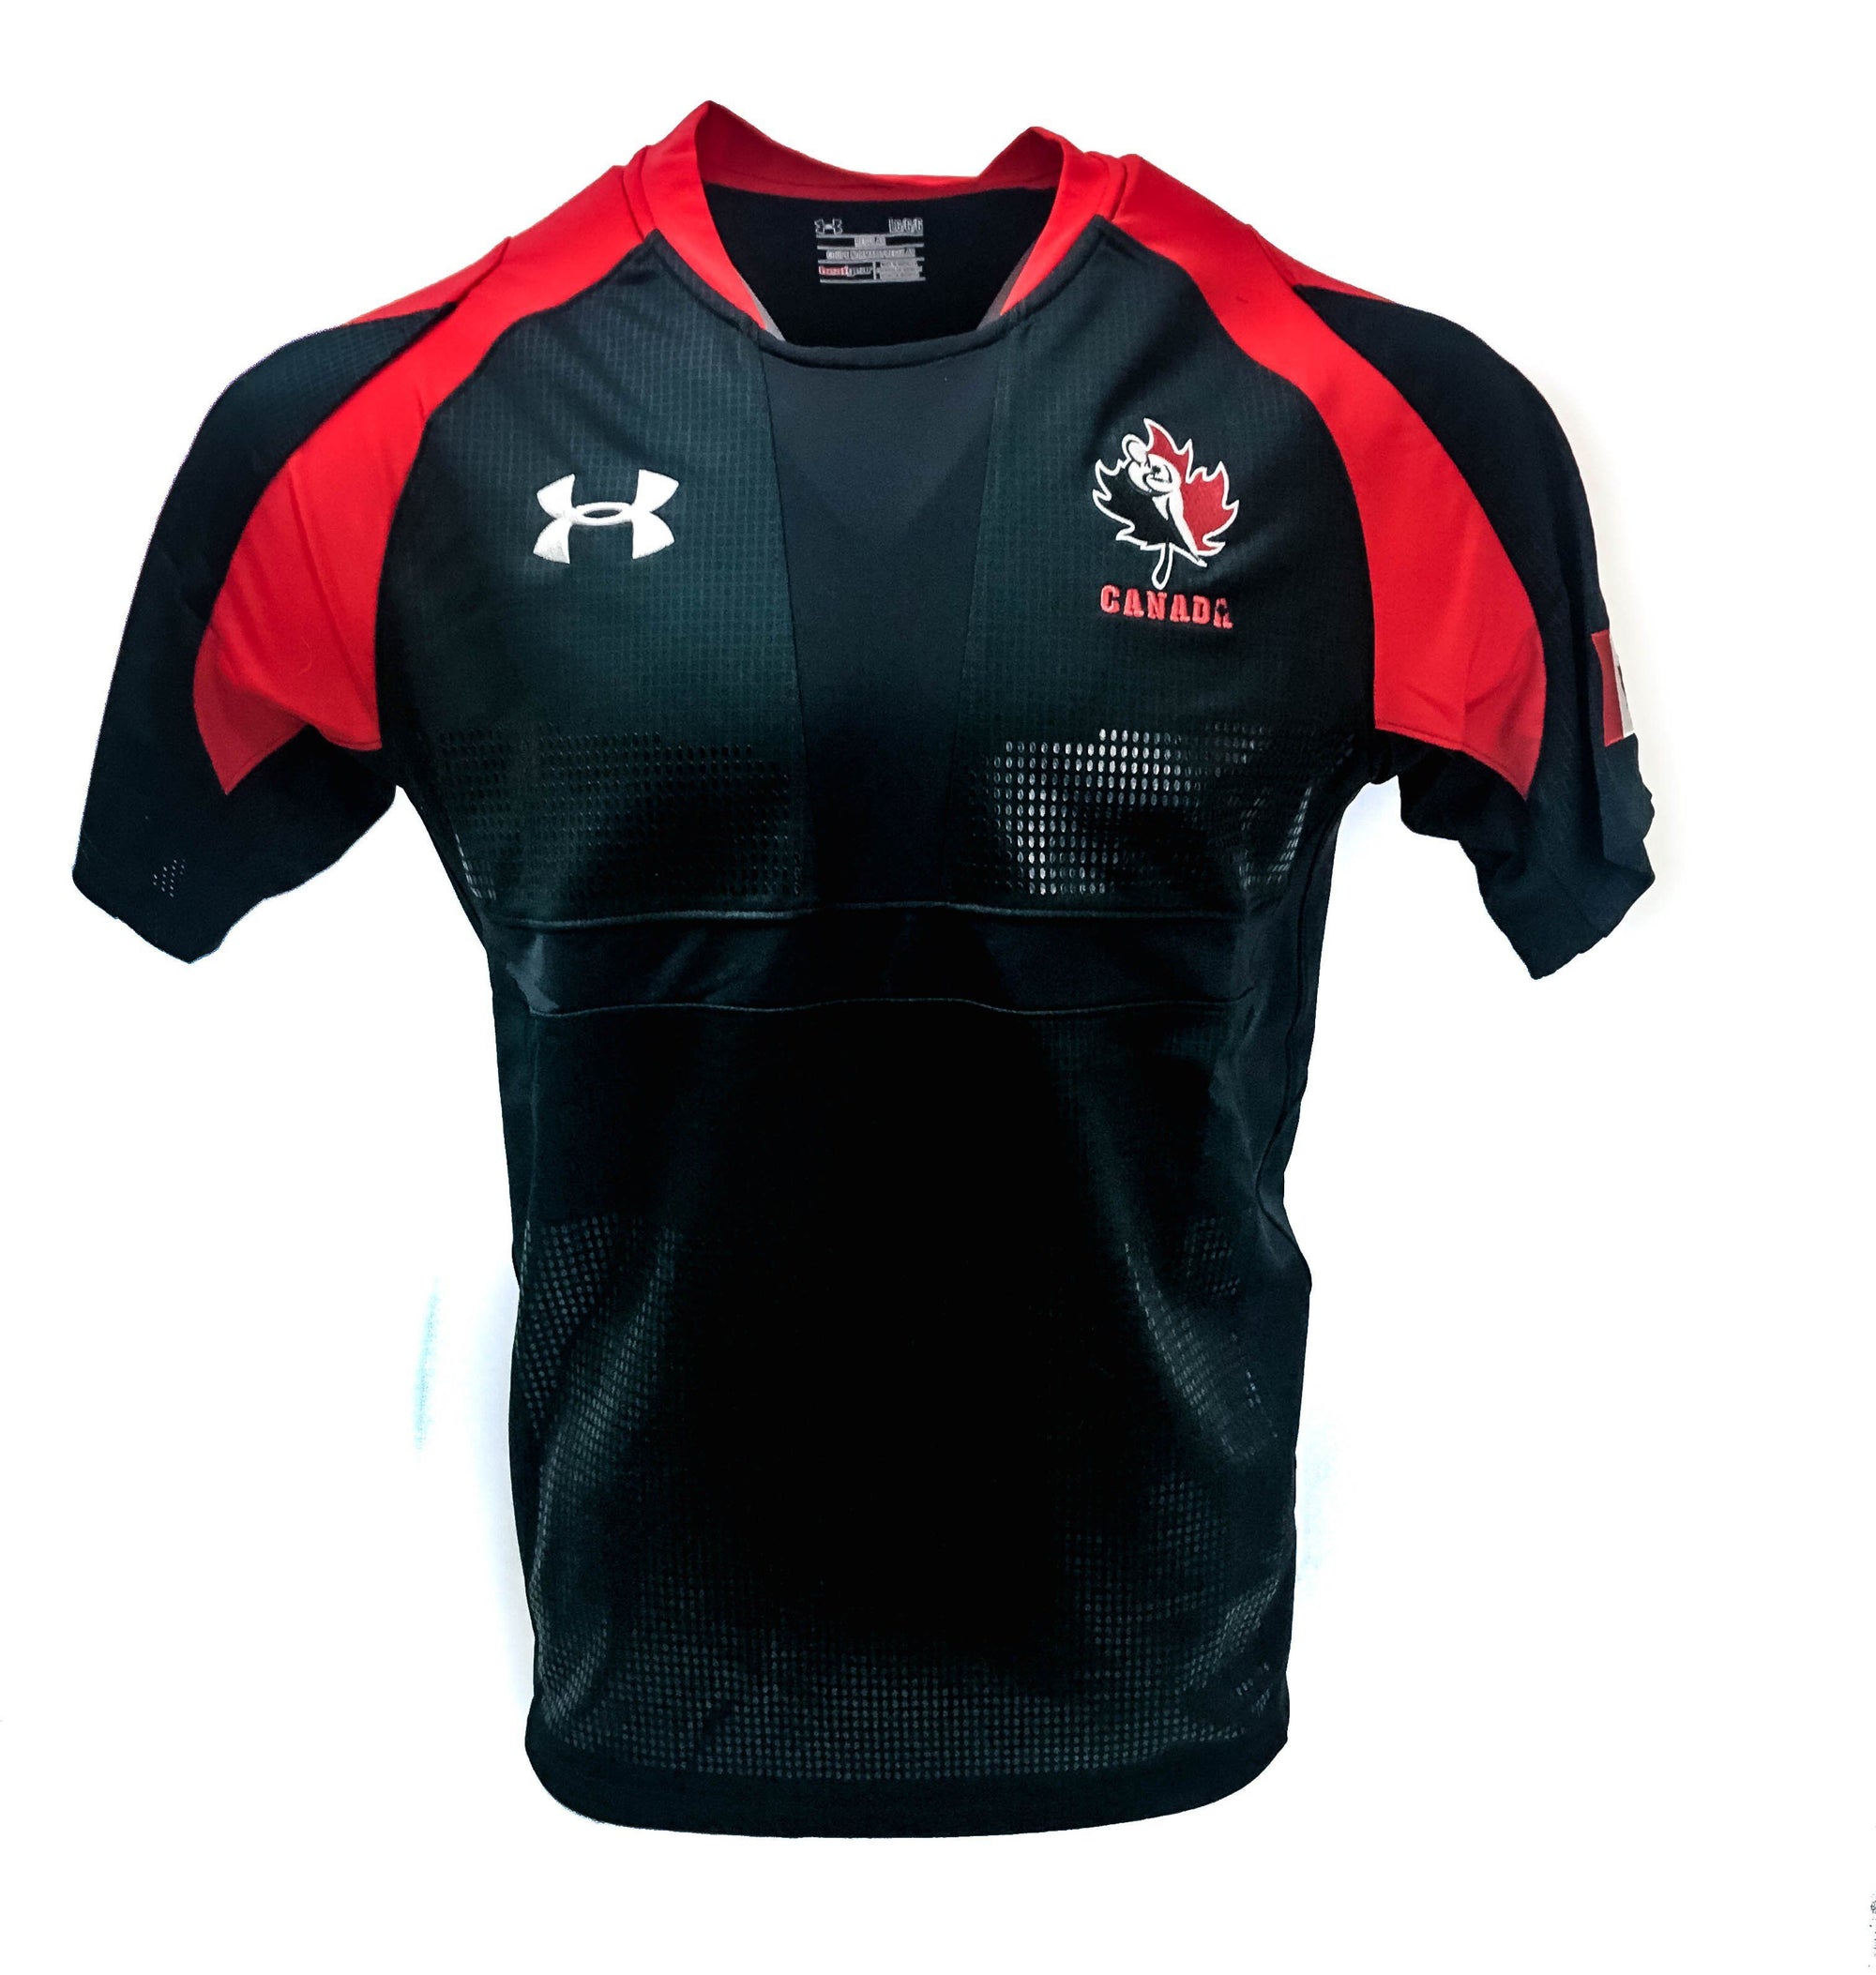 Rugby Canada Jersey 14/15 Ruggers Rugby Supply